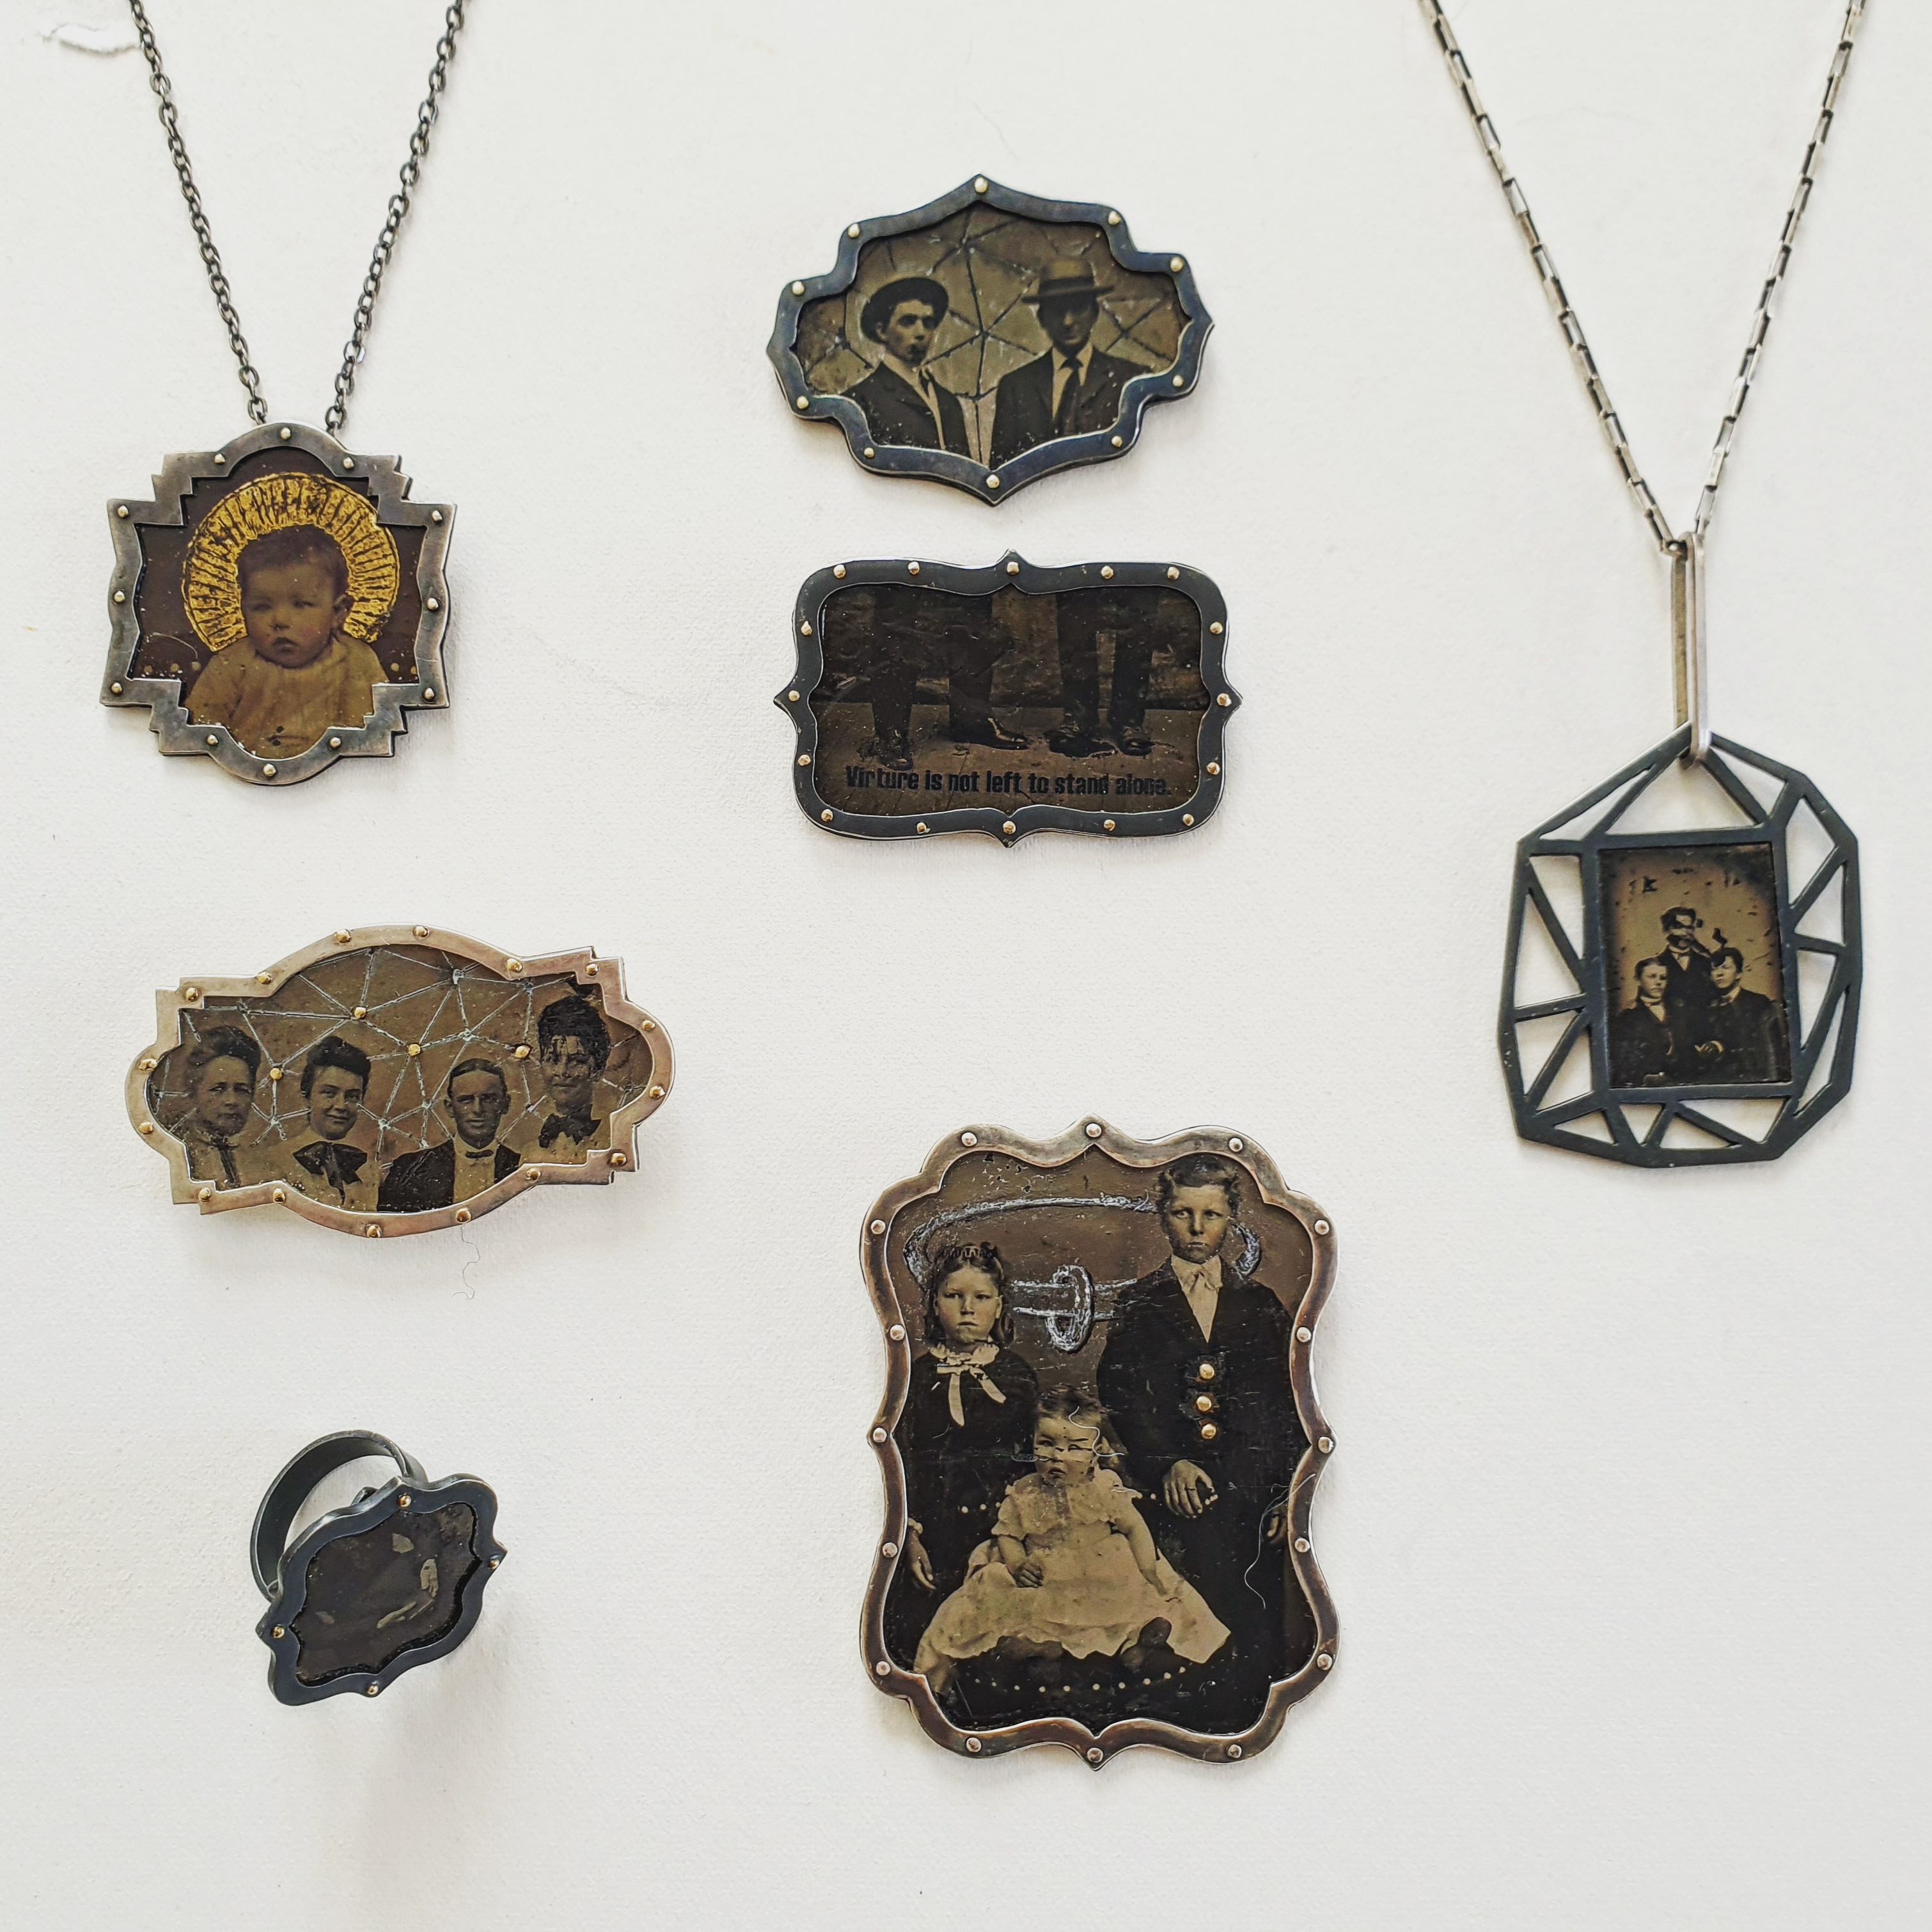 Tintype jewelry pieces in sterling silver and 18k gold by Naomi Muirhead